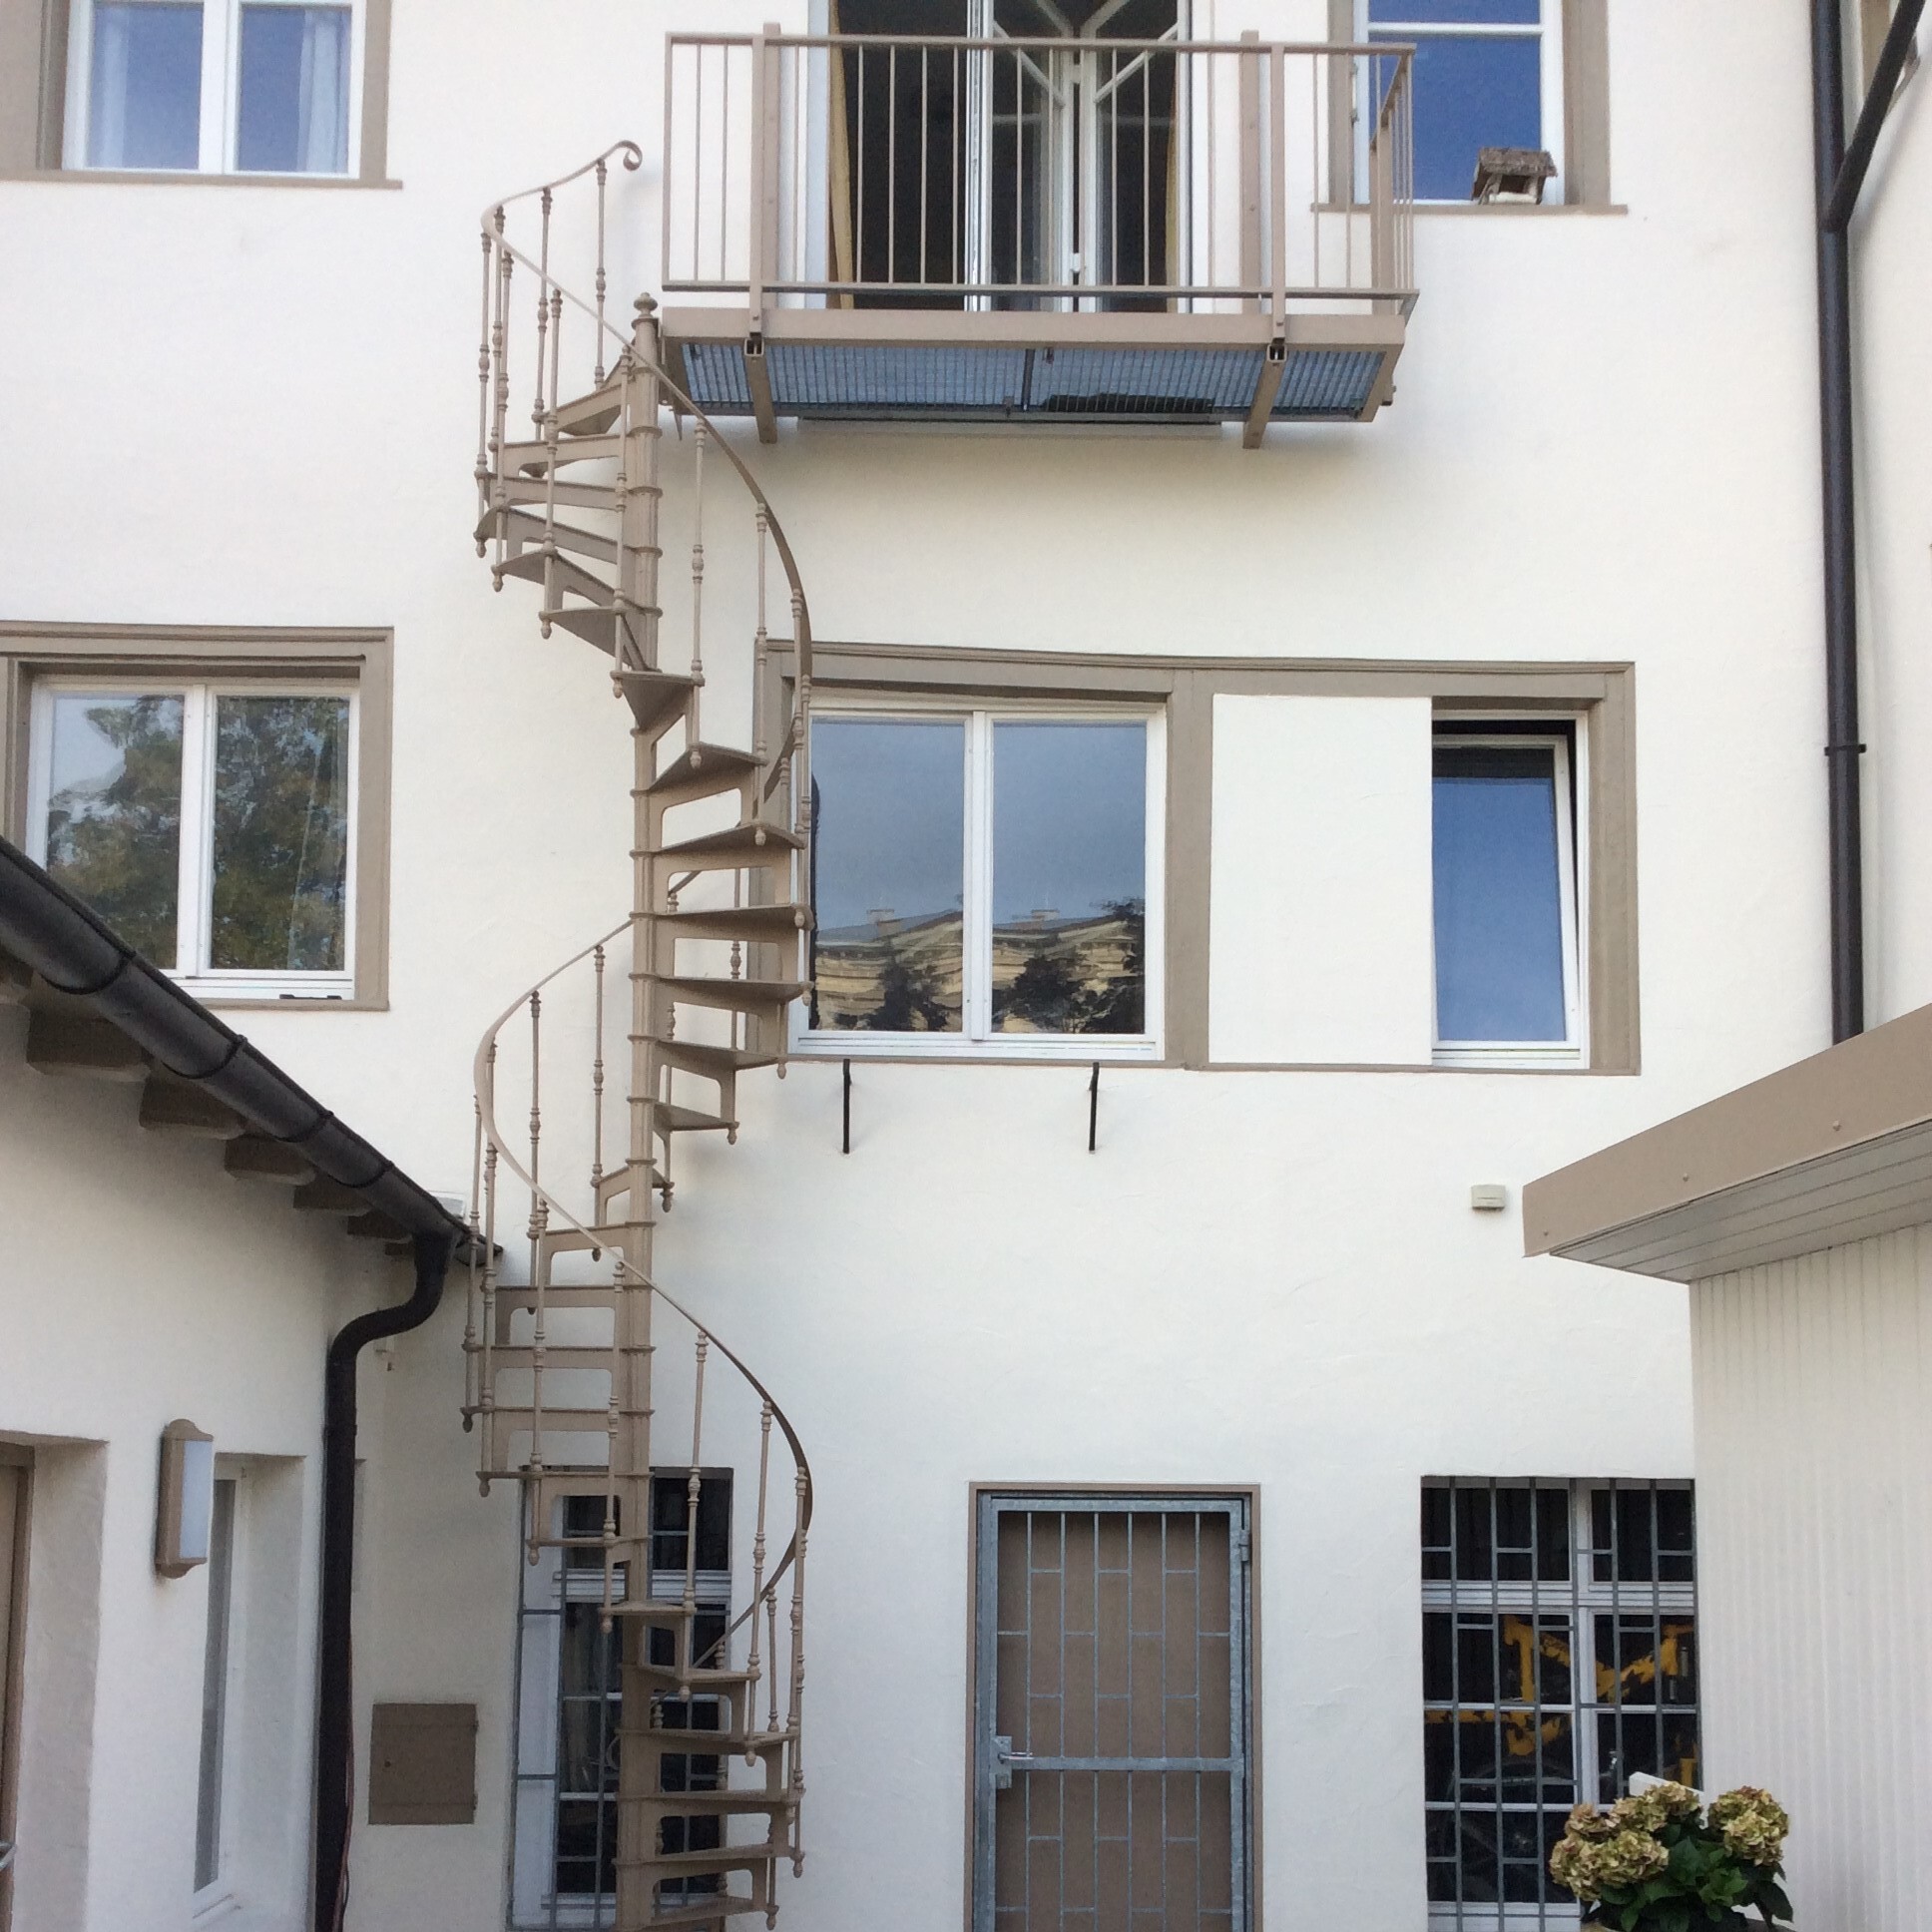 Double cast iron spiral staircase model Mirecourt in Germany